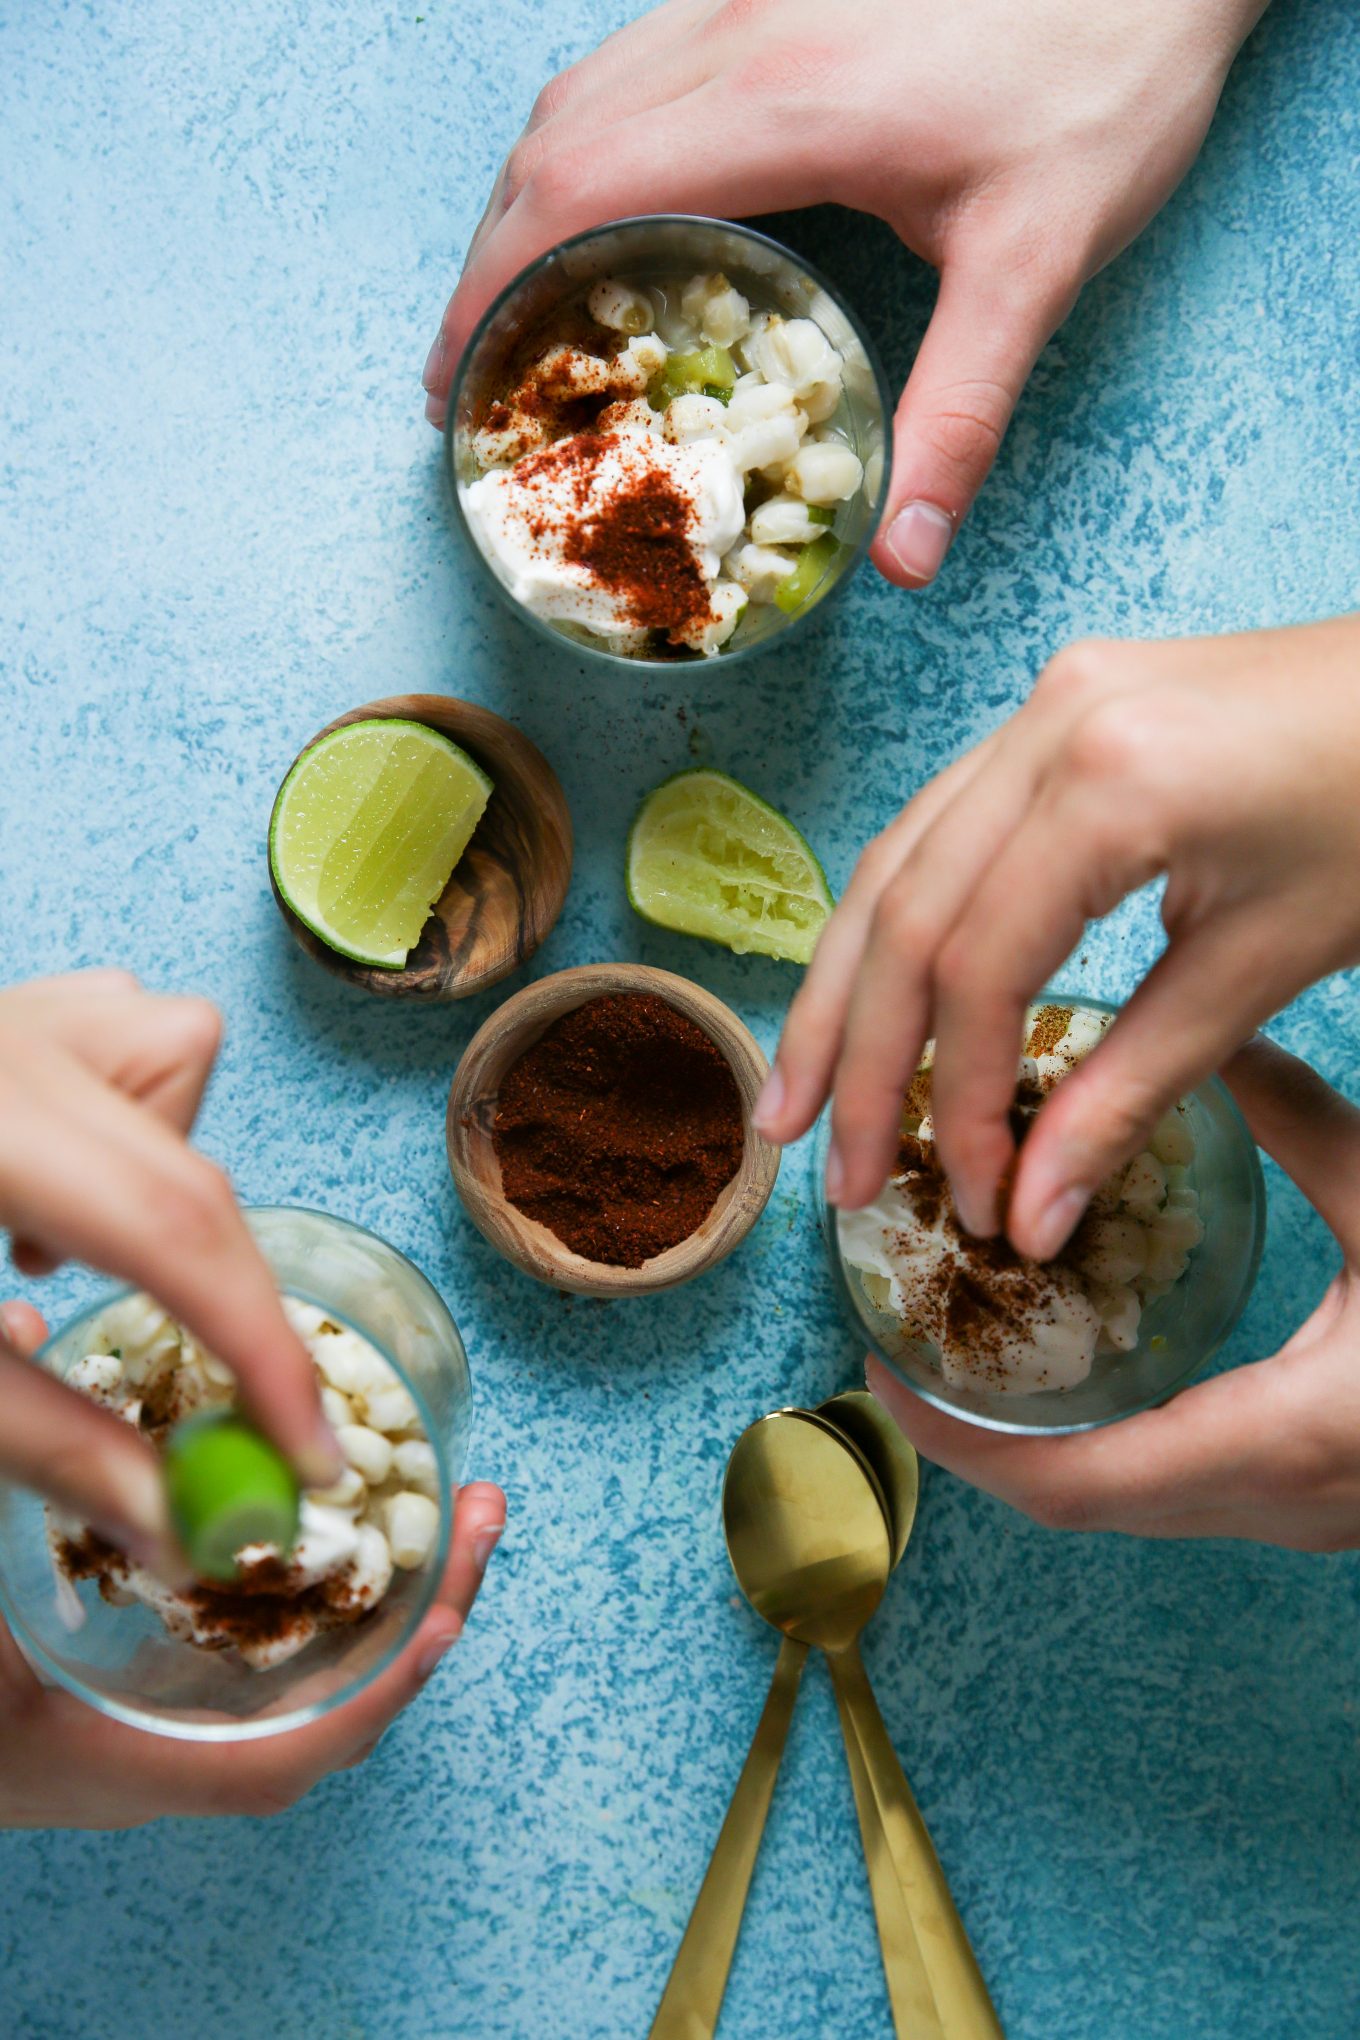 preparing the mexican esquites with chili powder, limes and salt